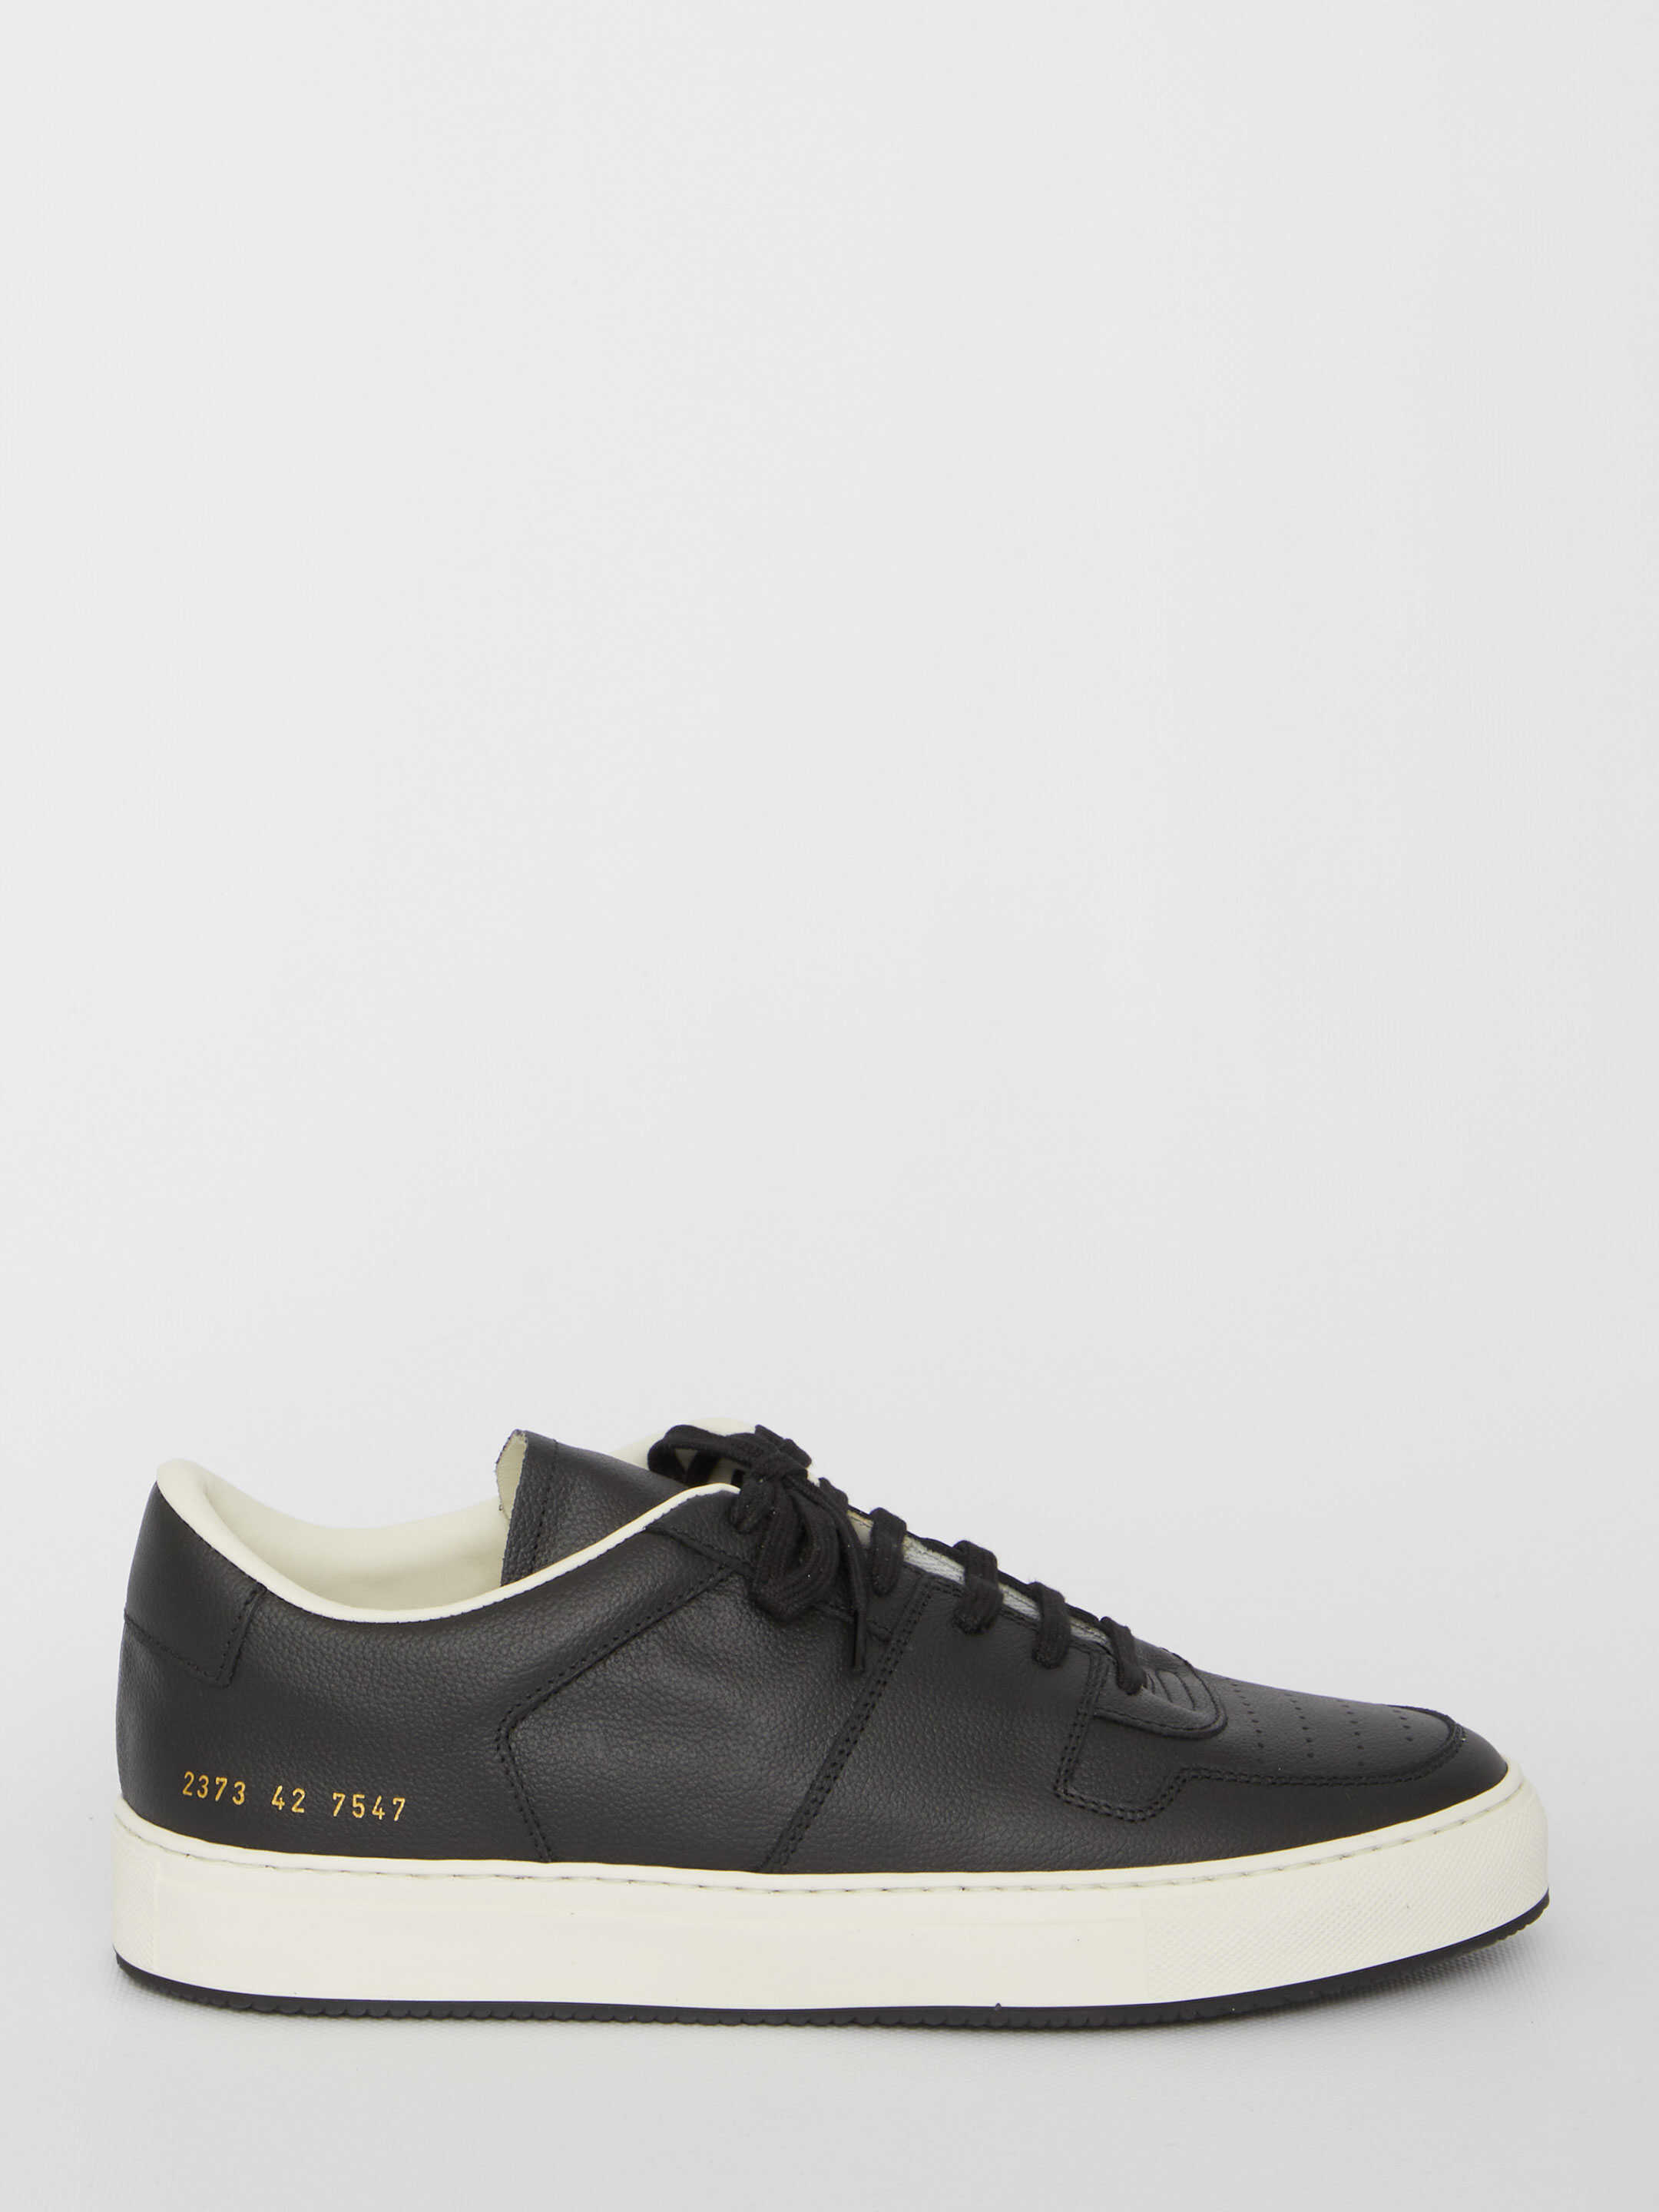 Common Projects Decades Low Sneakers Black